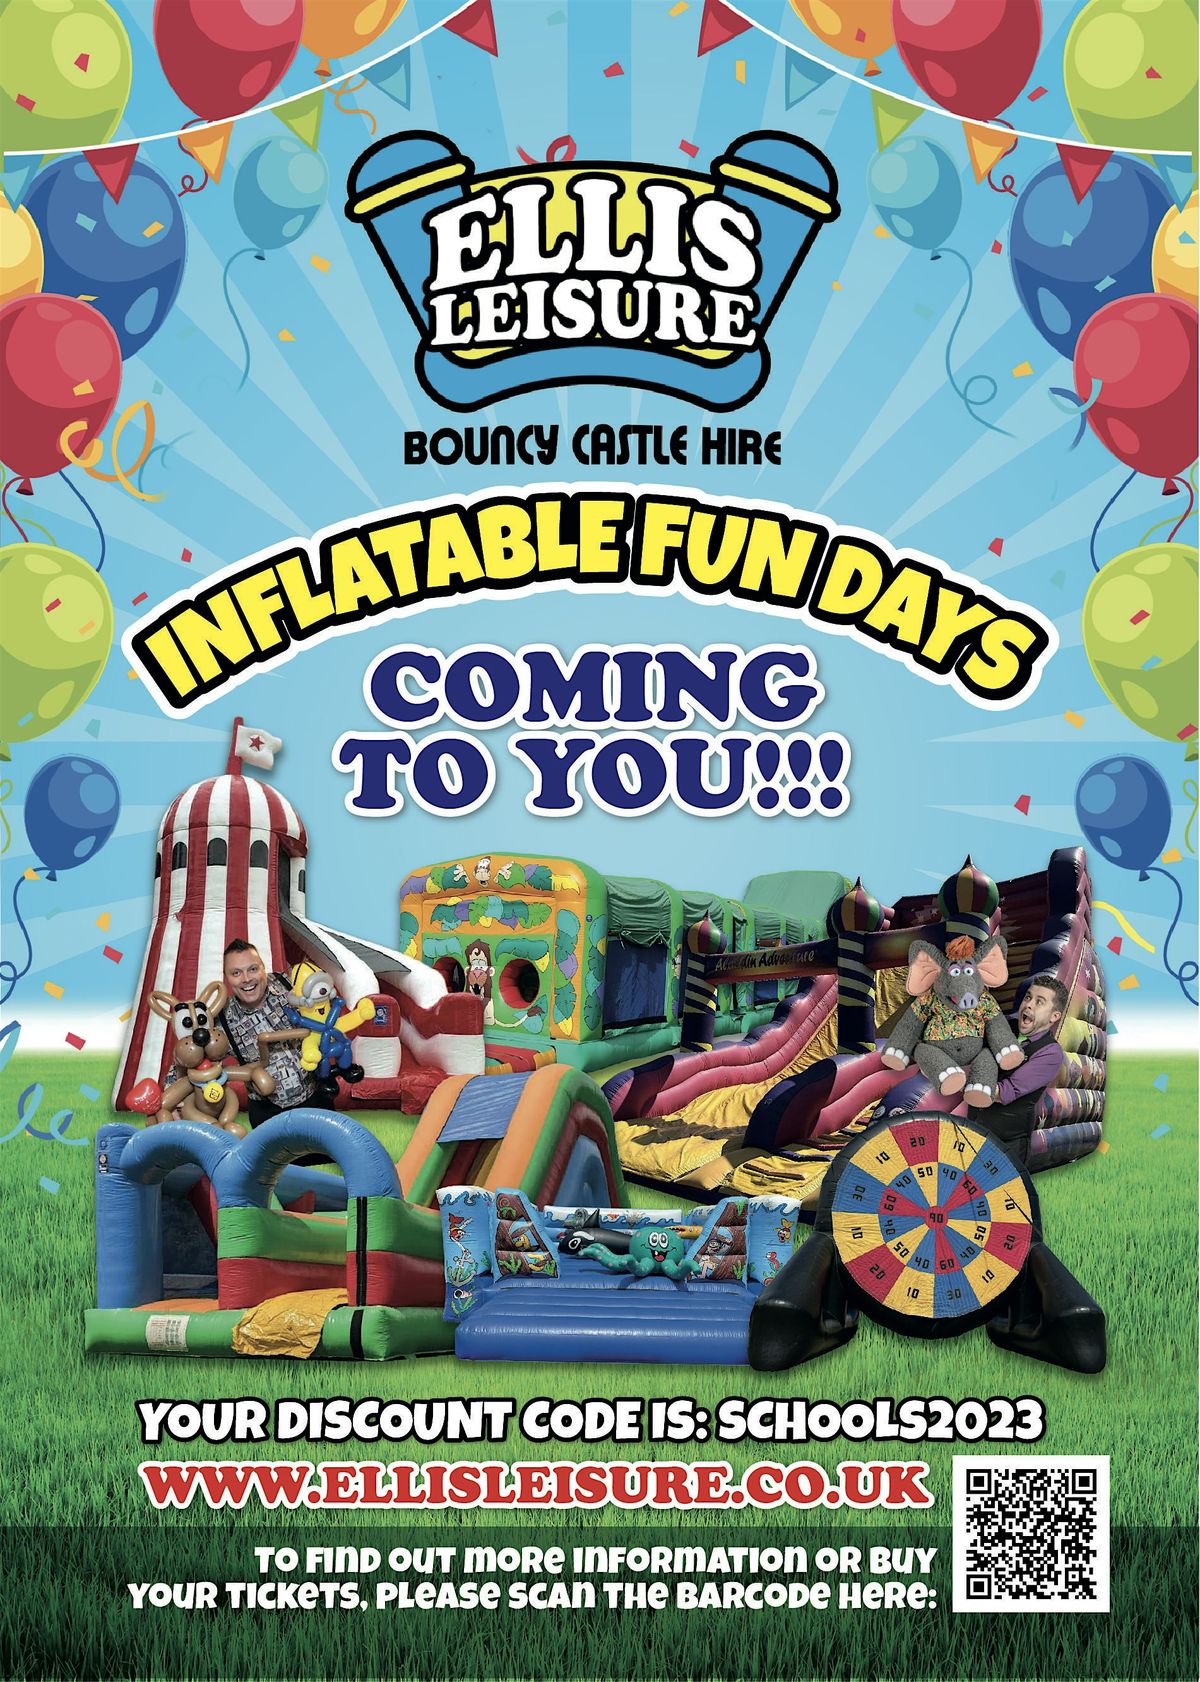 Outdoor Inflatable Fun Day - Priory Park SS2 6ND.